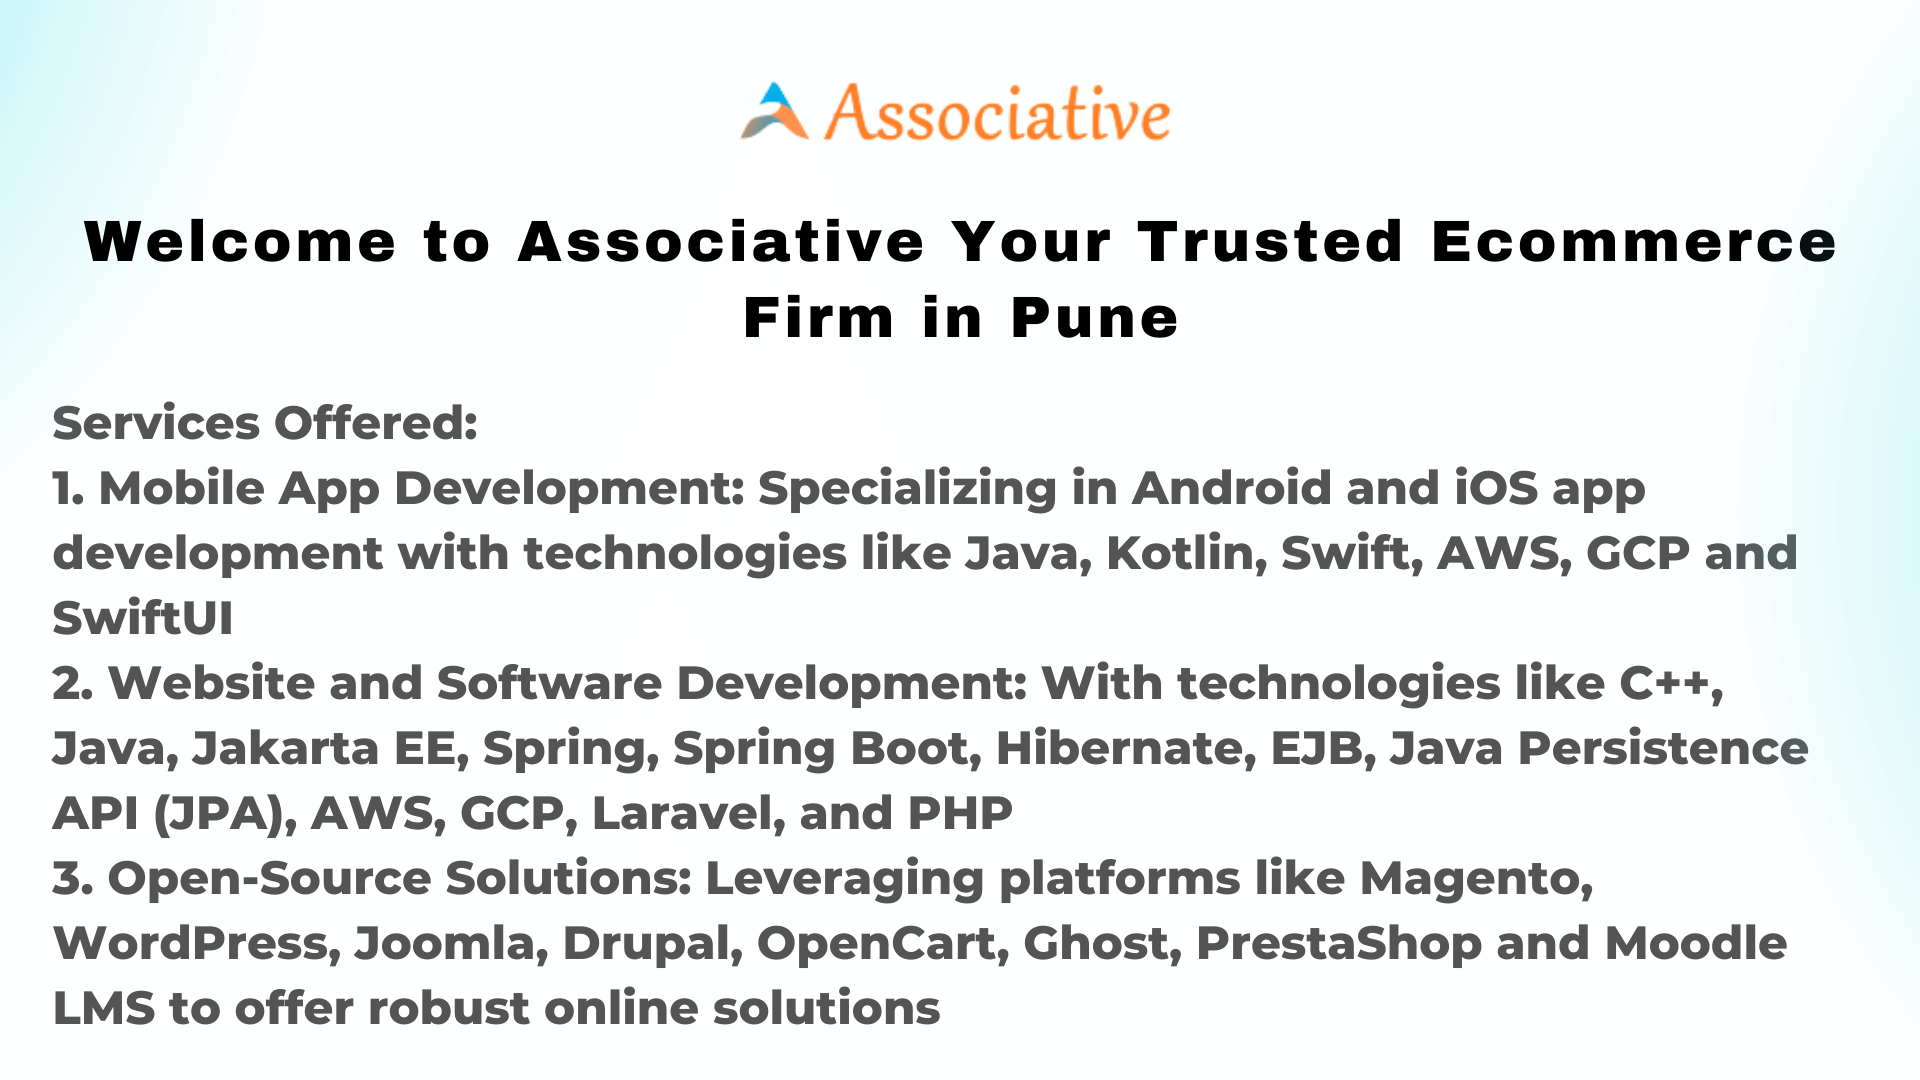 Welcome to Associative Your Trusted Ecommerce Firm in Pune